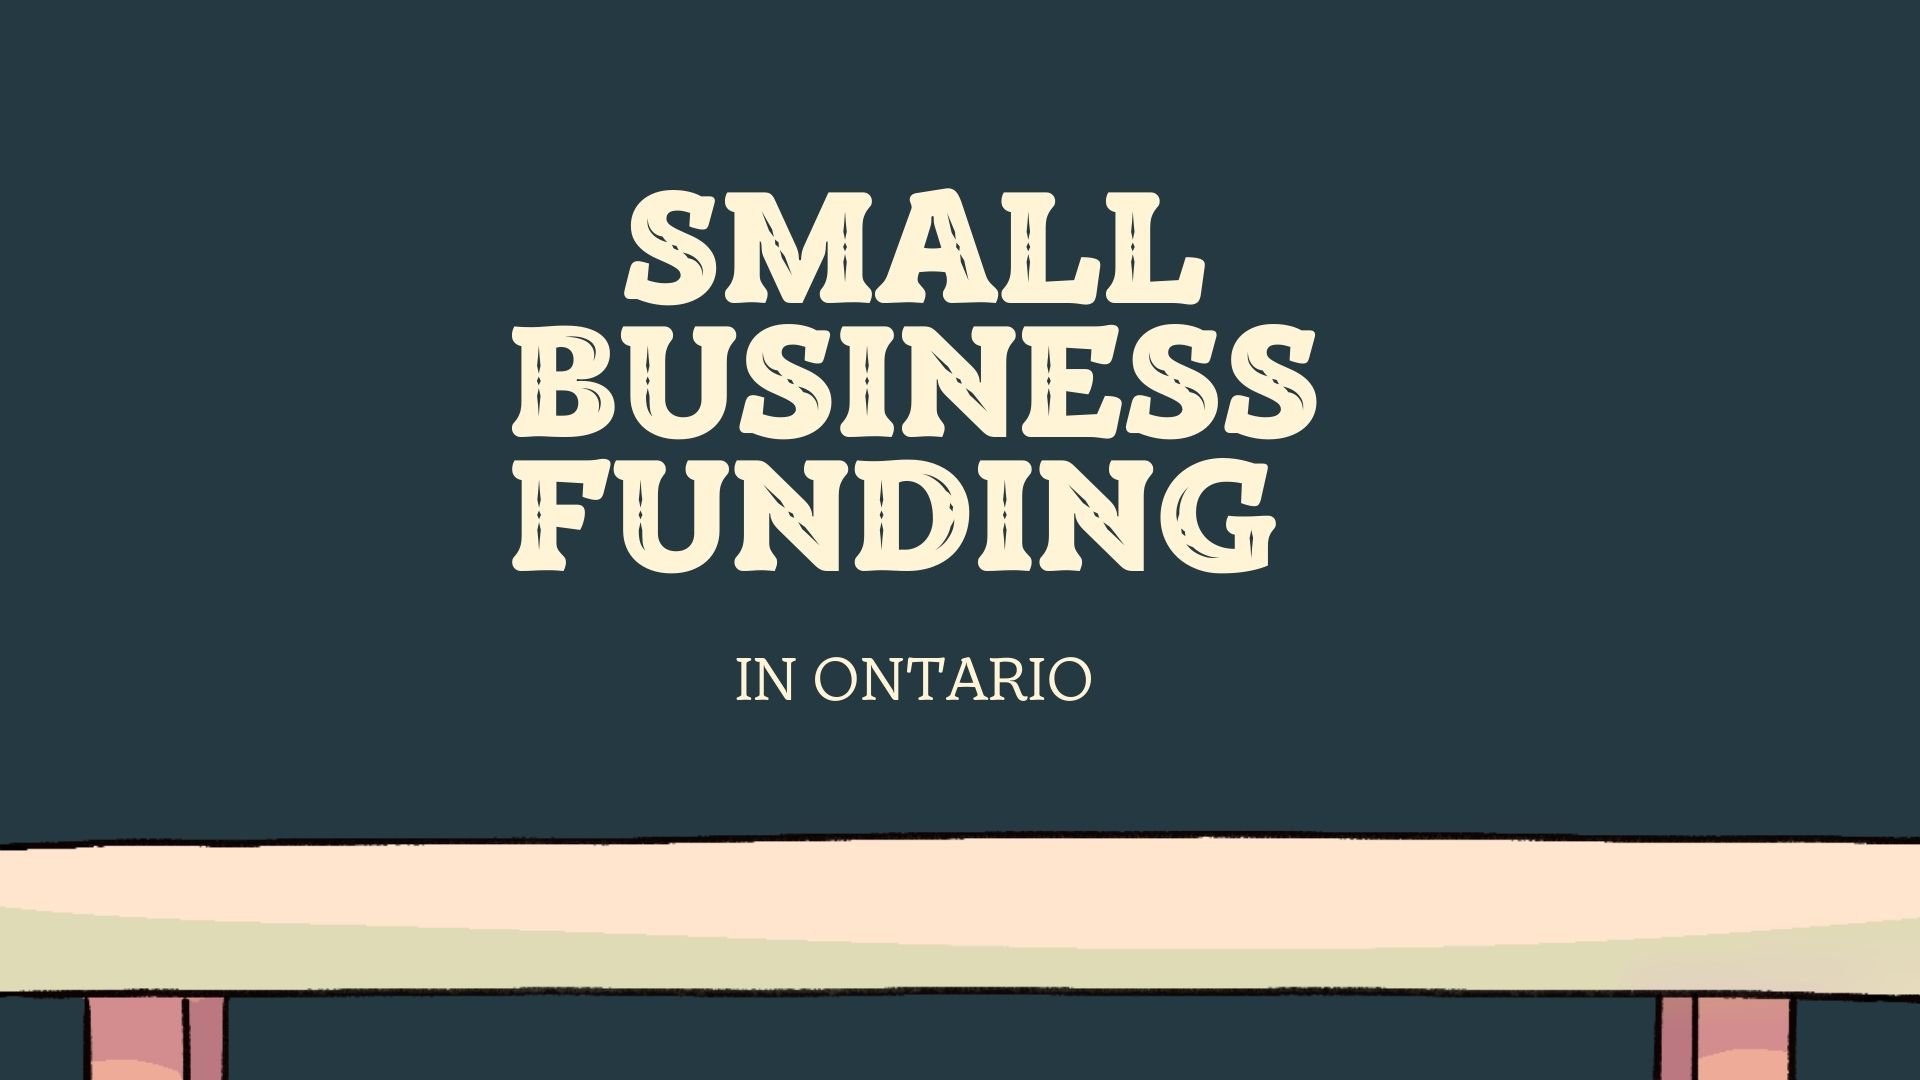 Small Business Funding in Ontario